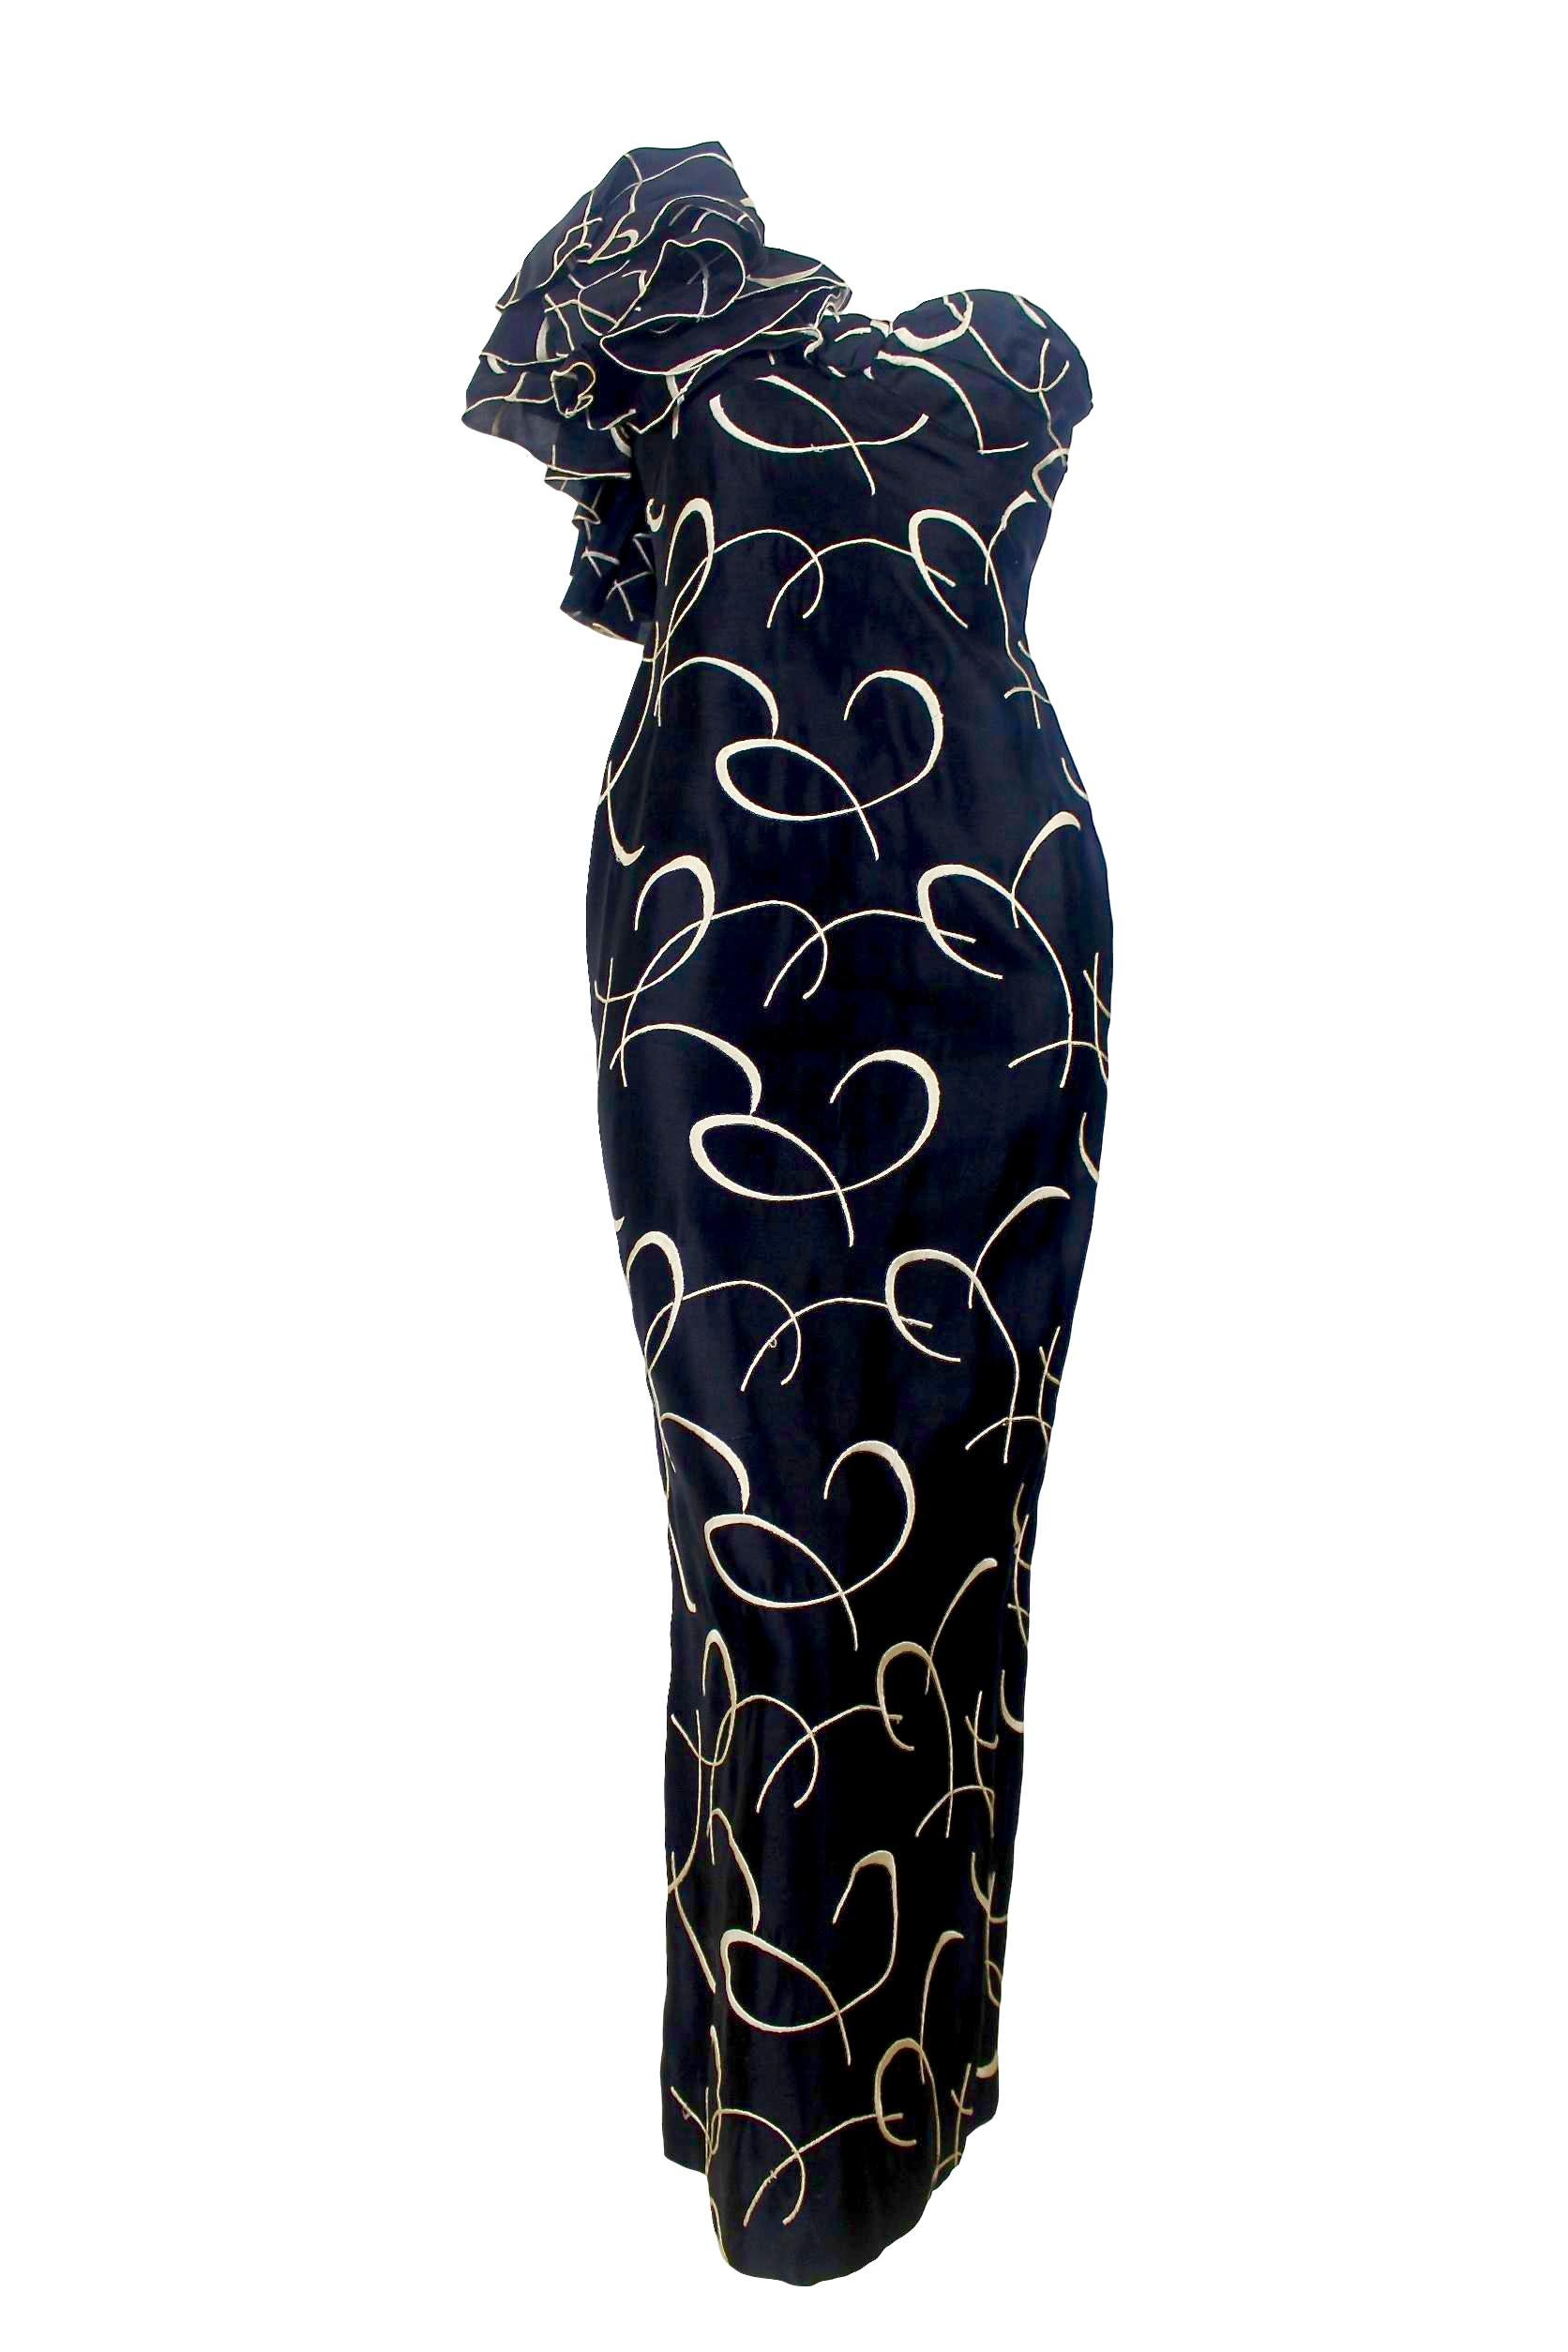 Women's Loris Azzaro Couture Silk Embroidered Evening Dress For Sale